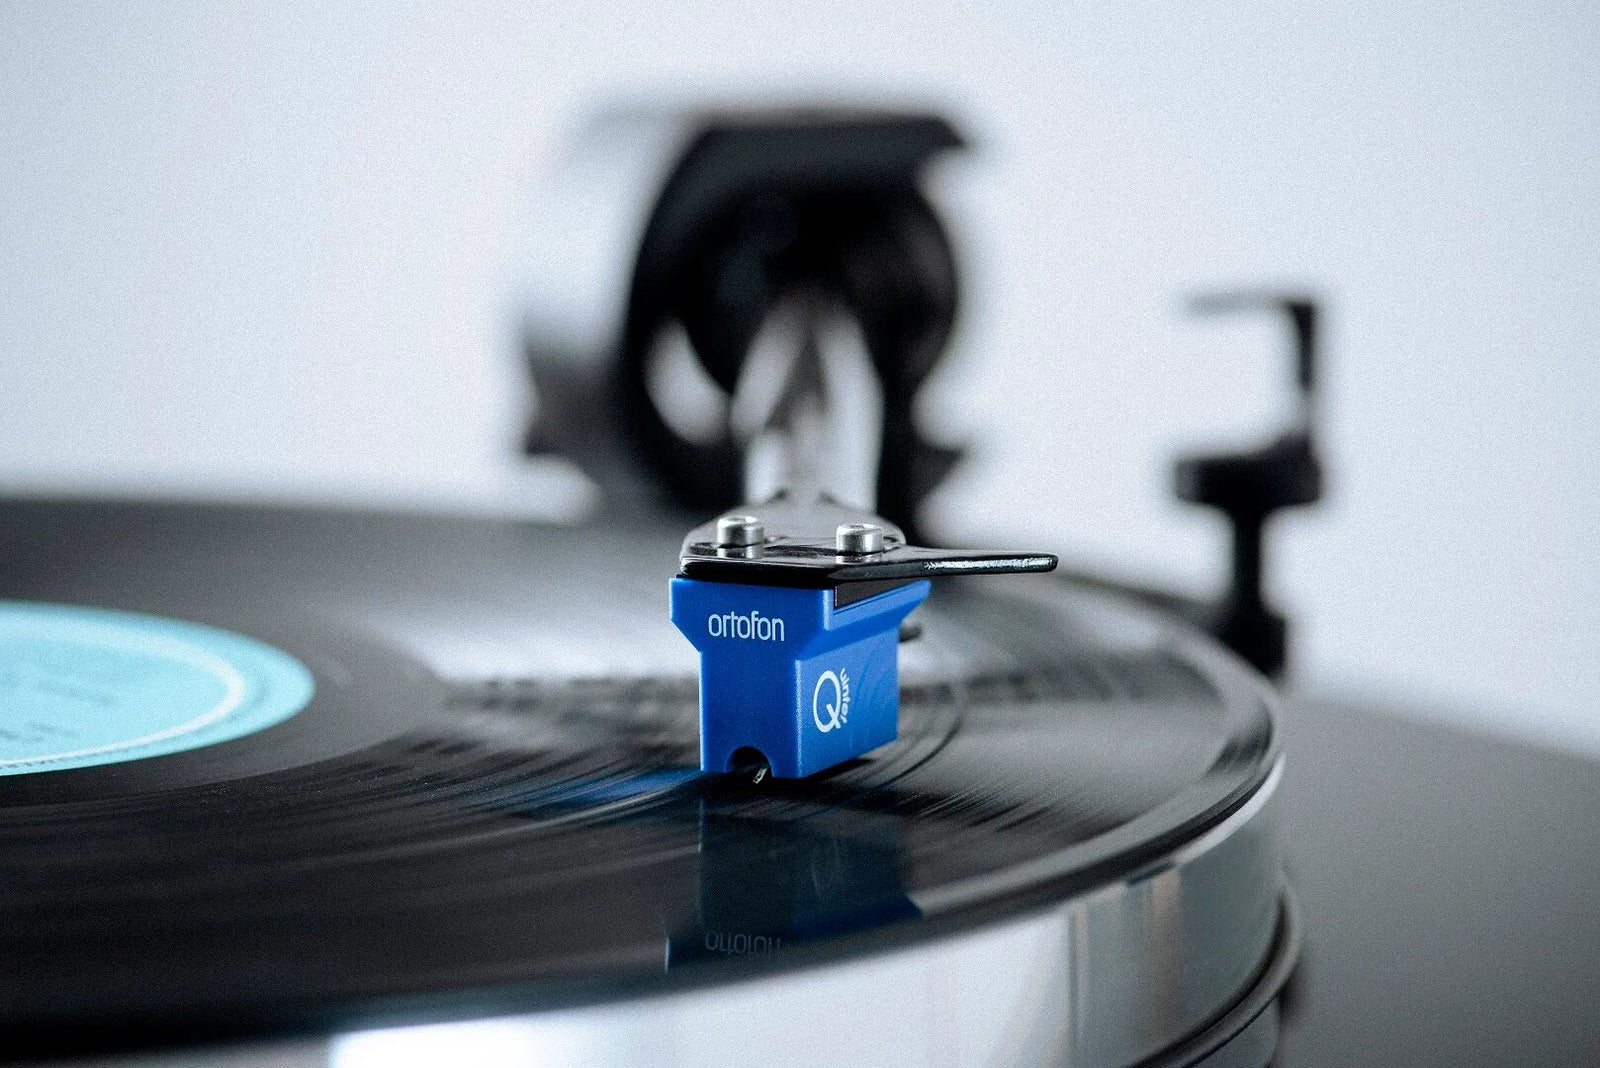 The Project X8 - Xtension 9 and 10 within reach The X8 is our most affordable mass-loaded turntable yet. Positioned neatly between the X2 and Xtension 9, the X8 adopts and breaks down its bigger siblings' Pro-ject Audio at Vinyl Sound. Available at the best price: Pro-ject Turntables X1 - X8 - X2 – Pro-ject 6 PerspeX SB - RPM 1 Carbon - RPM 10 Carbon – Xtension 12 Evolution... Pro-ject HiFi Electronics Phono Preamplifier · Vinyl Recording · Pro-ject Preamplifier – Pro-ject Phono Box... 